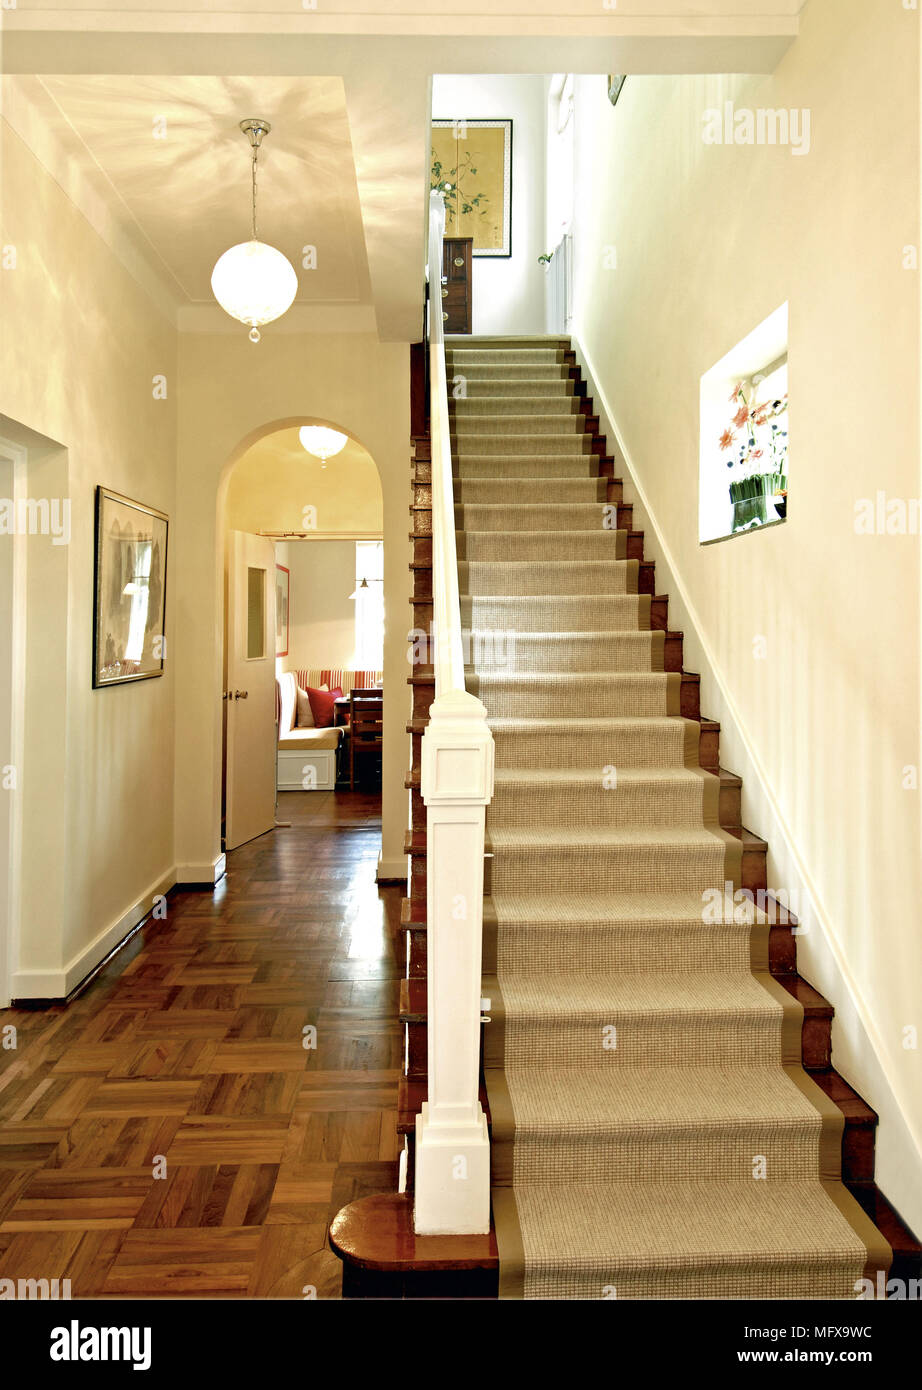 Staircase with carpeted treads in traditional hallway Stock Photo